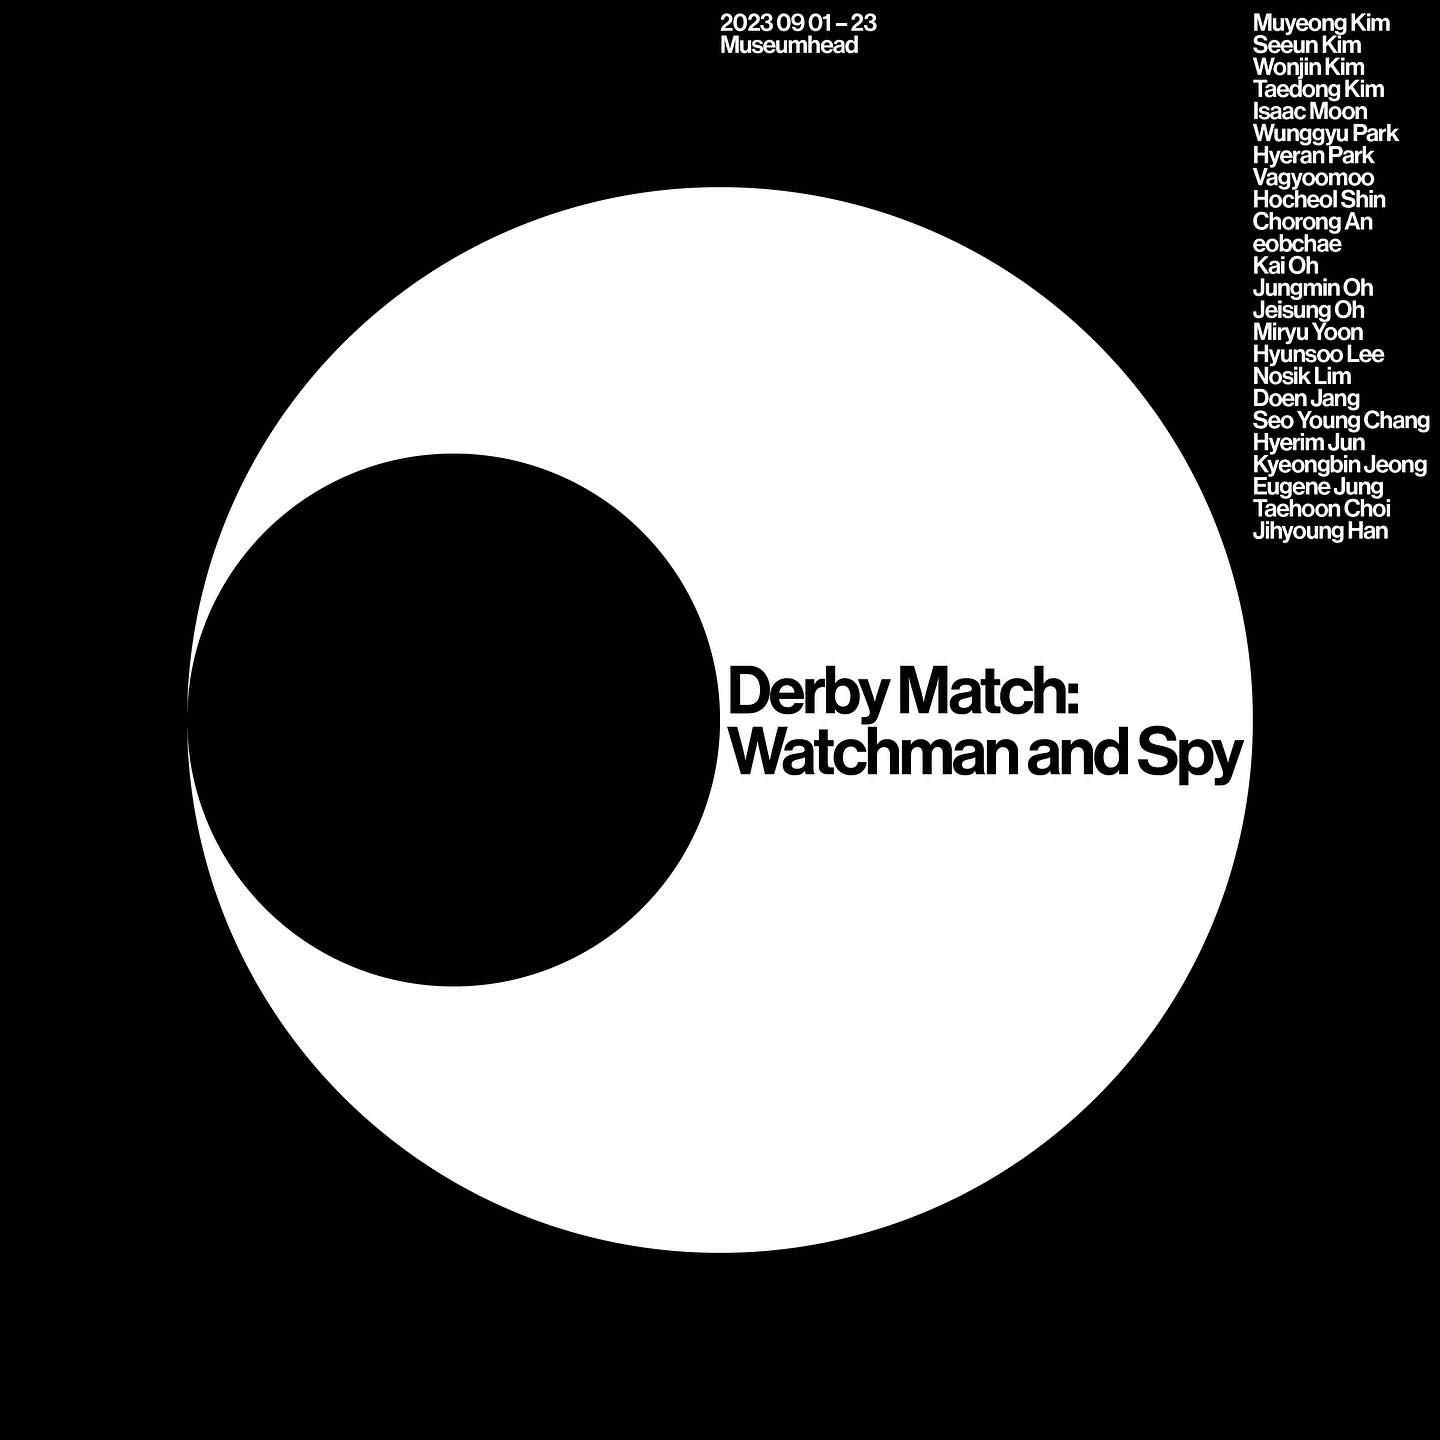 Derby Match: Watchman and Spy